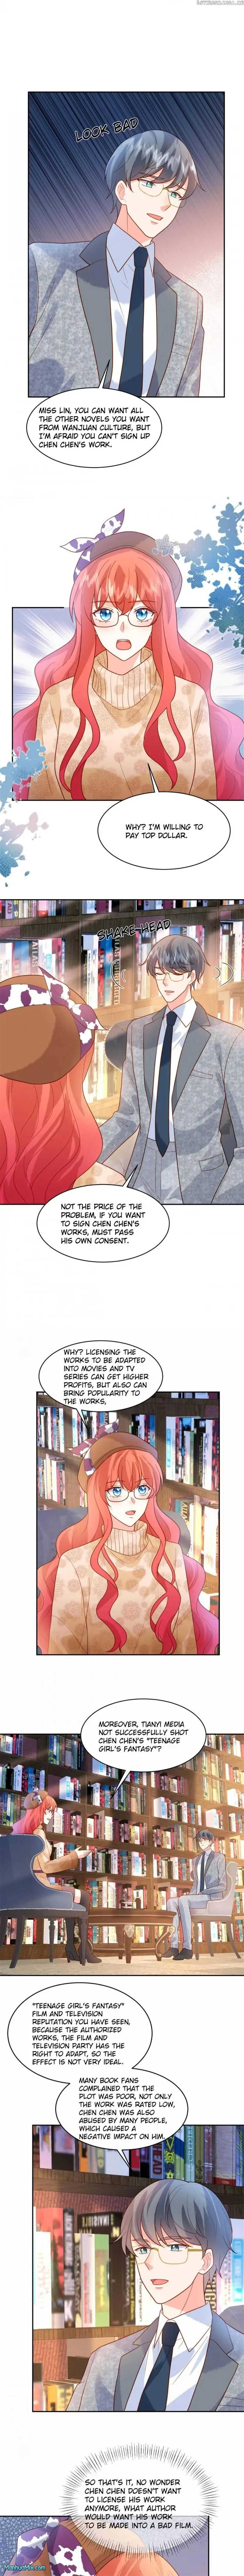 Rebirth Begins With Refusal Of Marriage - Page 3